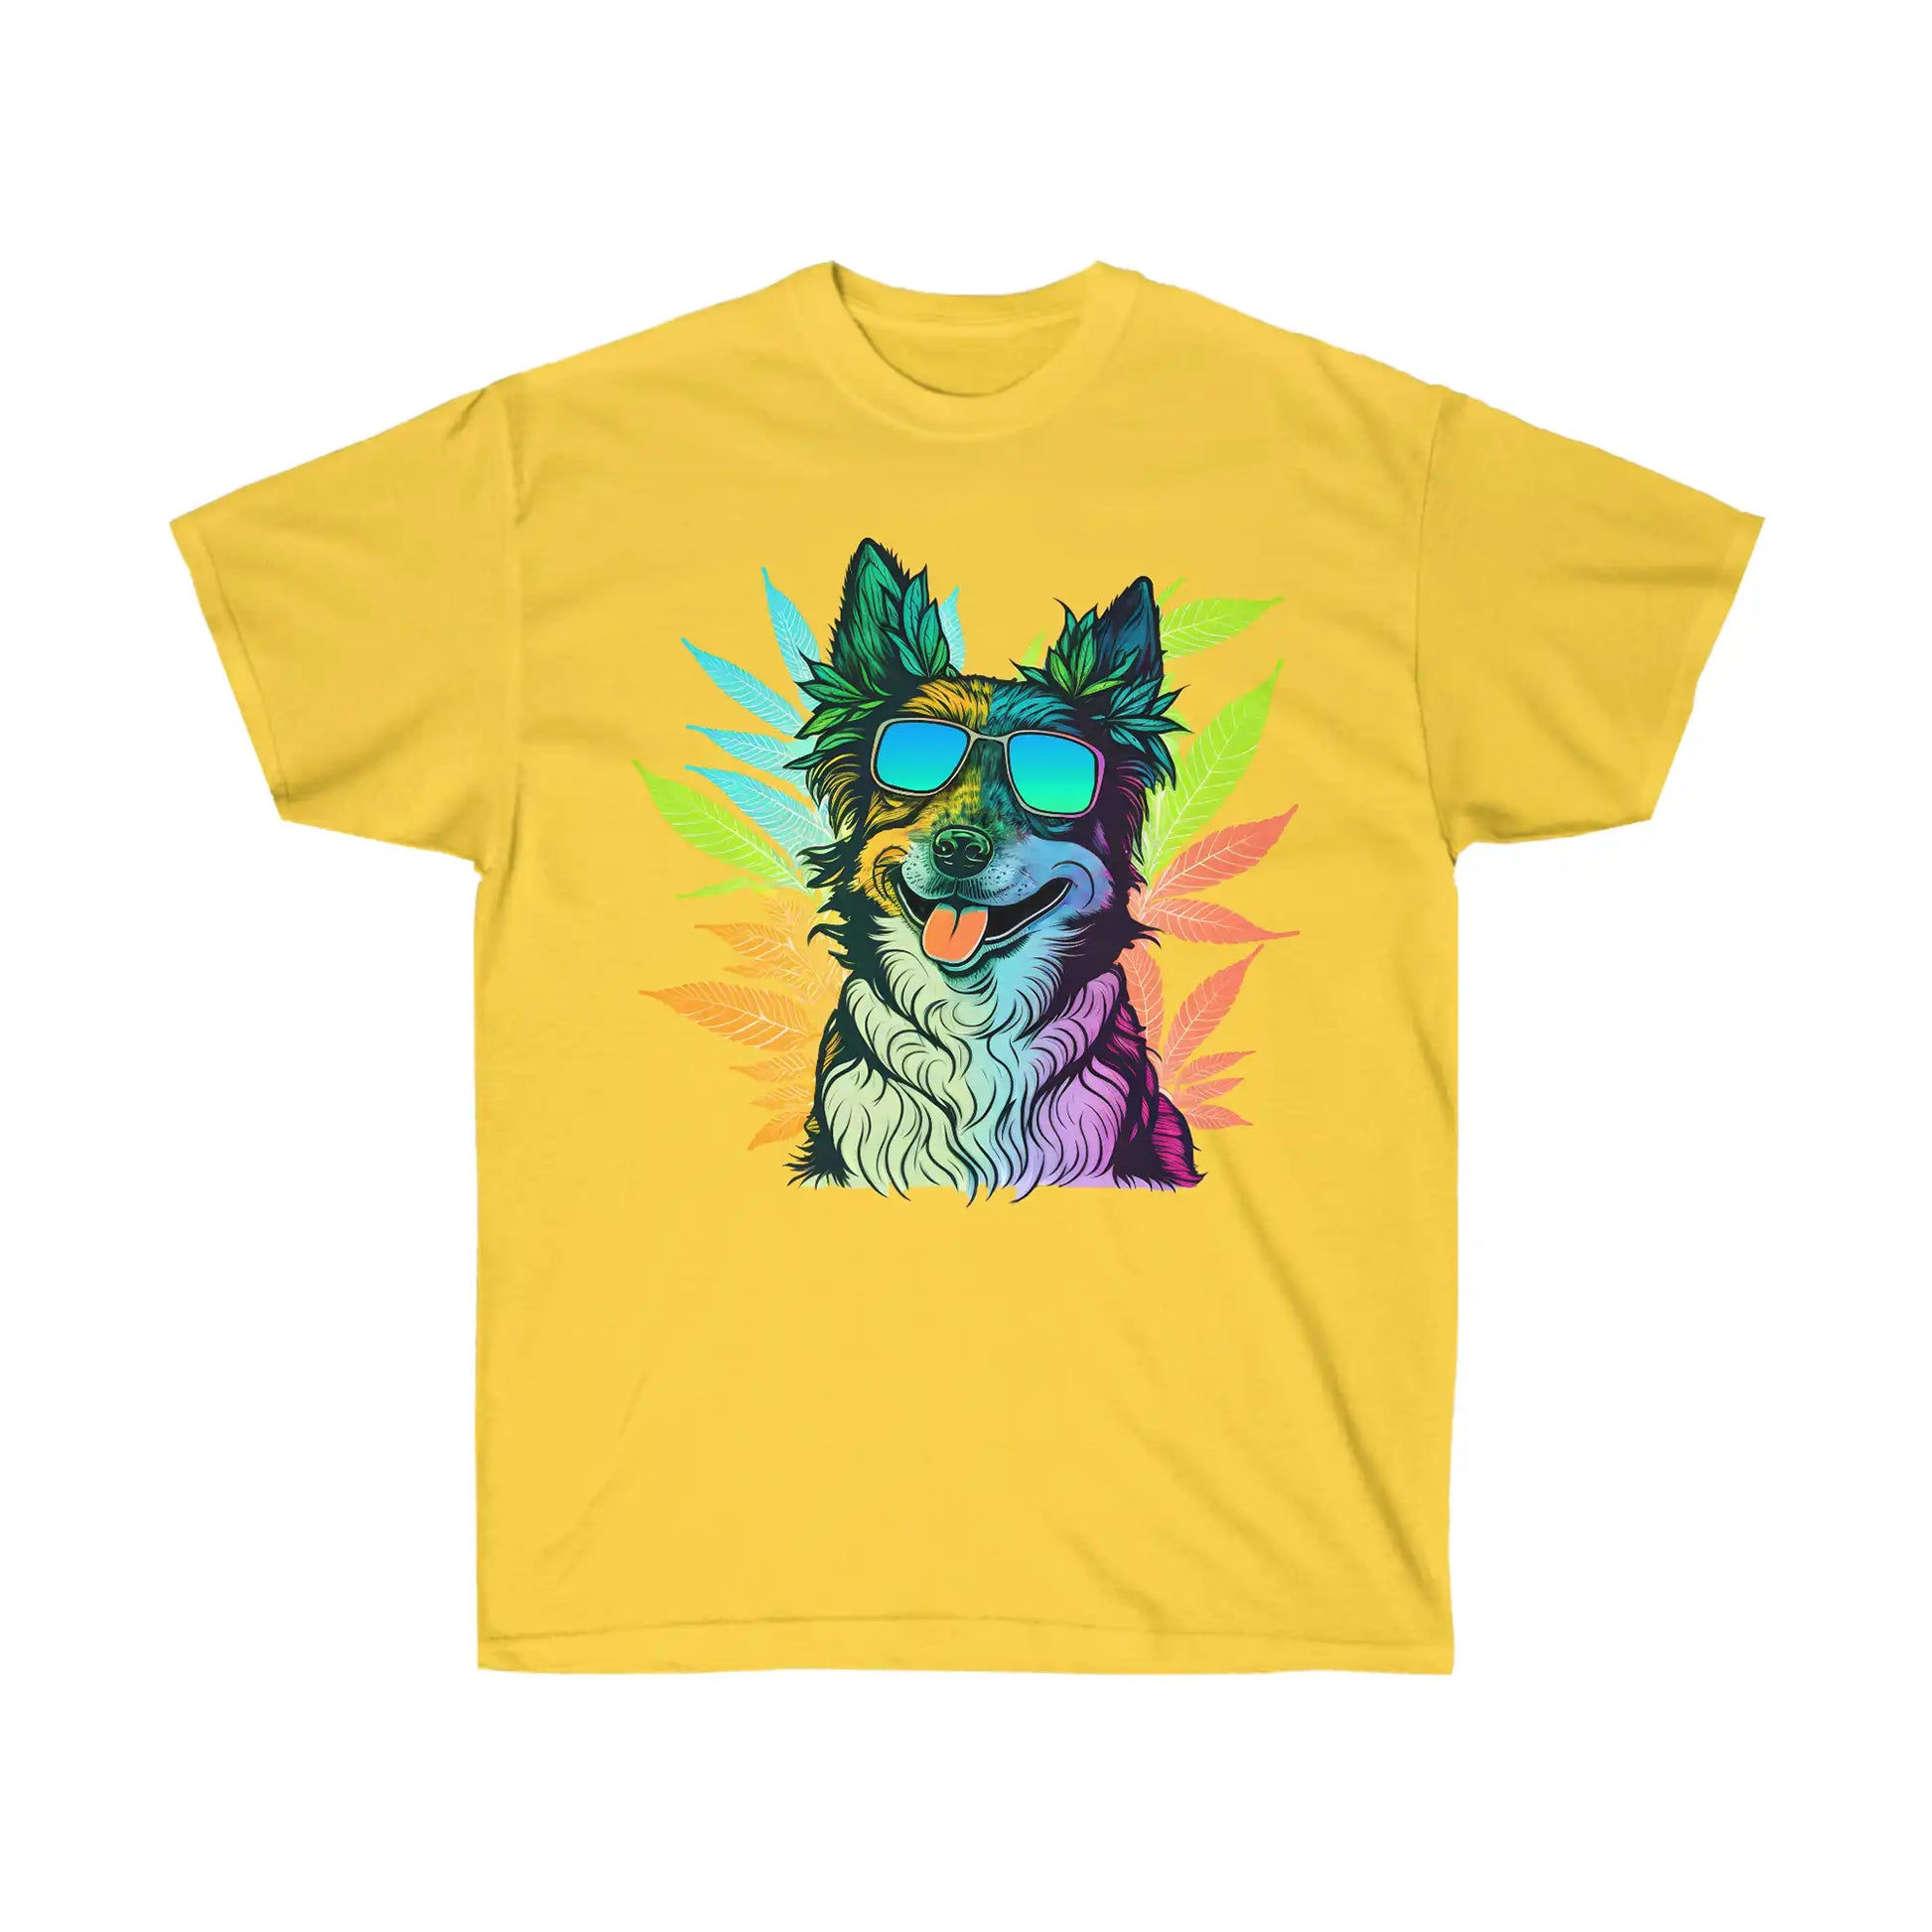 Cool Border Collie with shades surrounded by cannabis on a Daisy Yellow weed t shirt